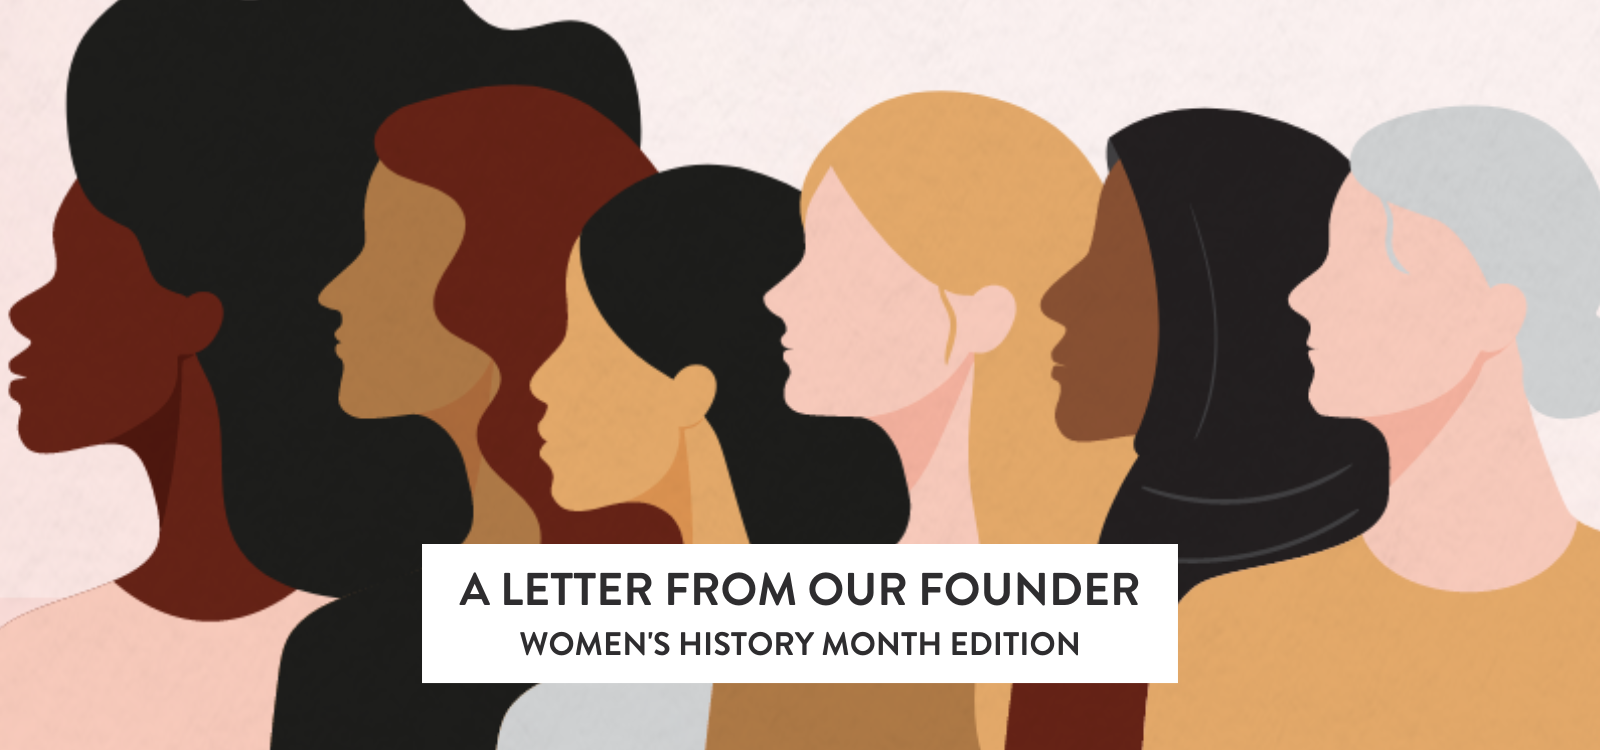 A Letter From Our Founder: Women's History Month